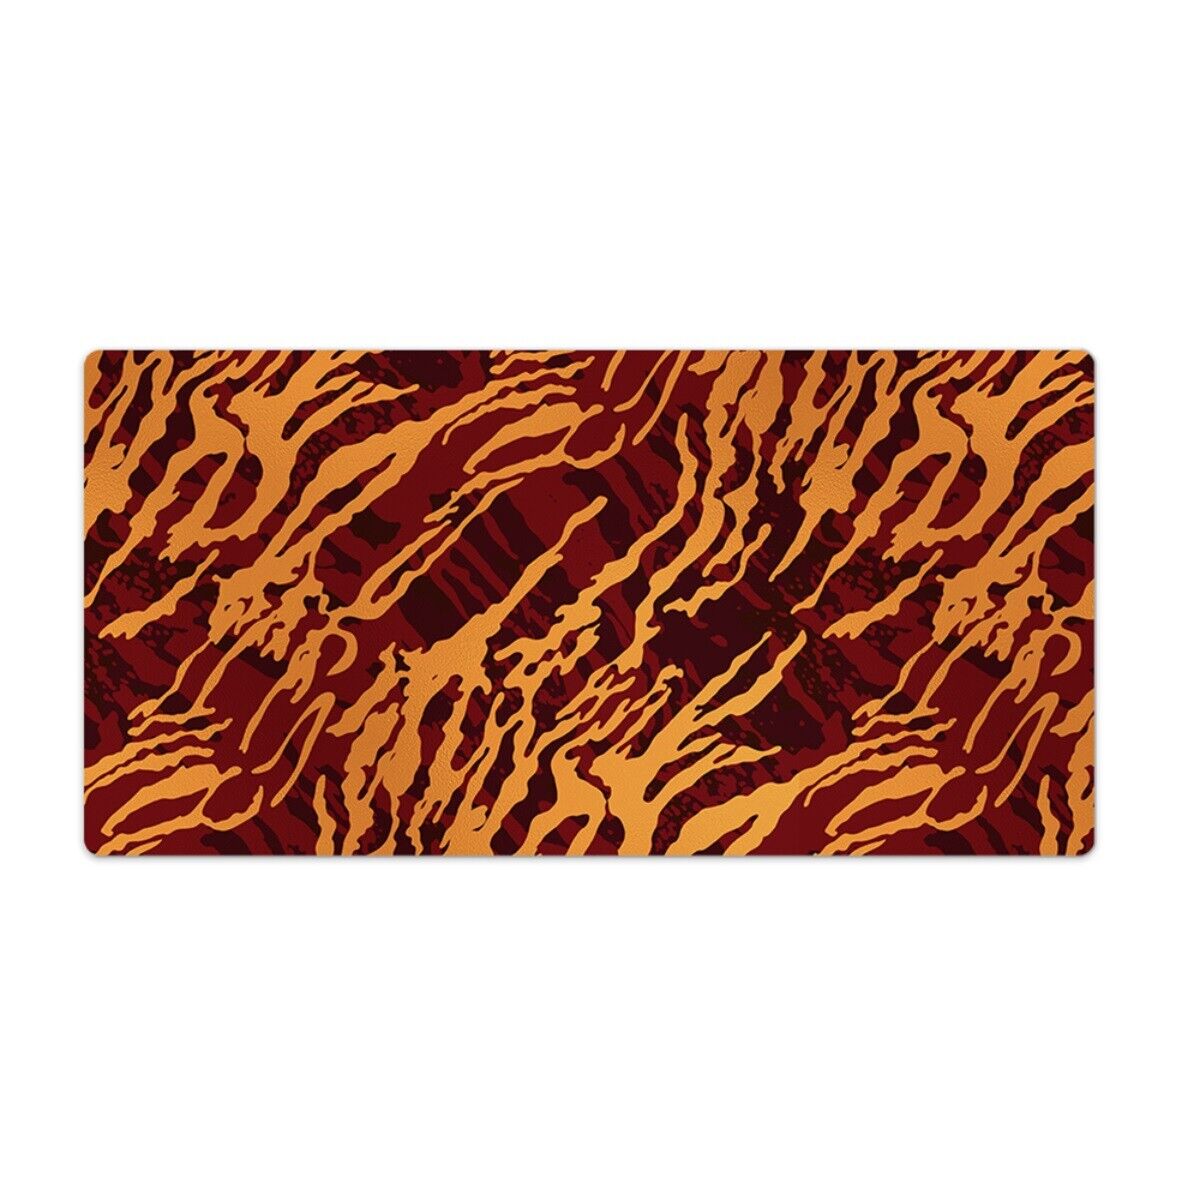 Waterproof Mat Desk Writing Pad for Office and Home Fiery Leopard 100x50